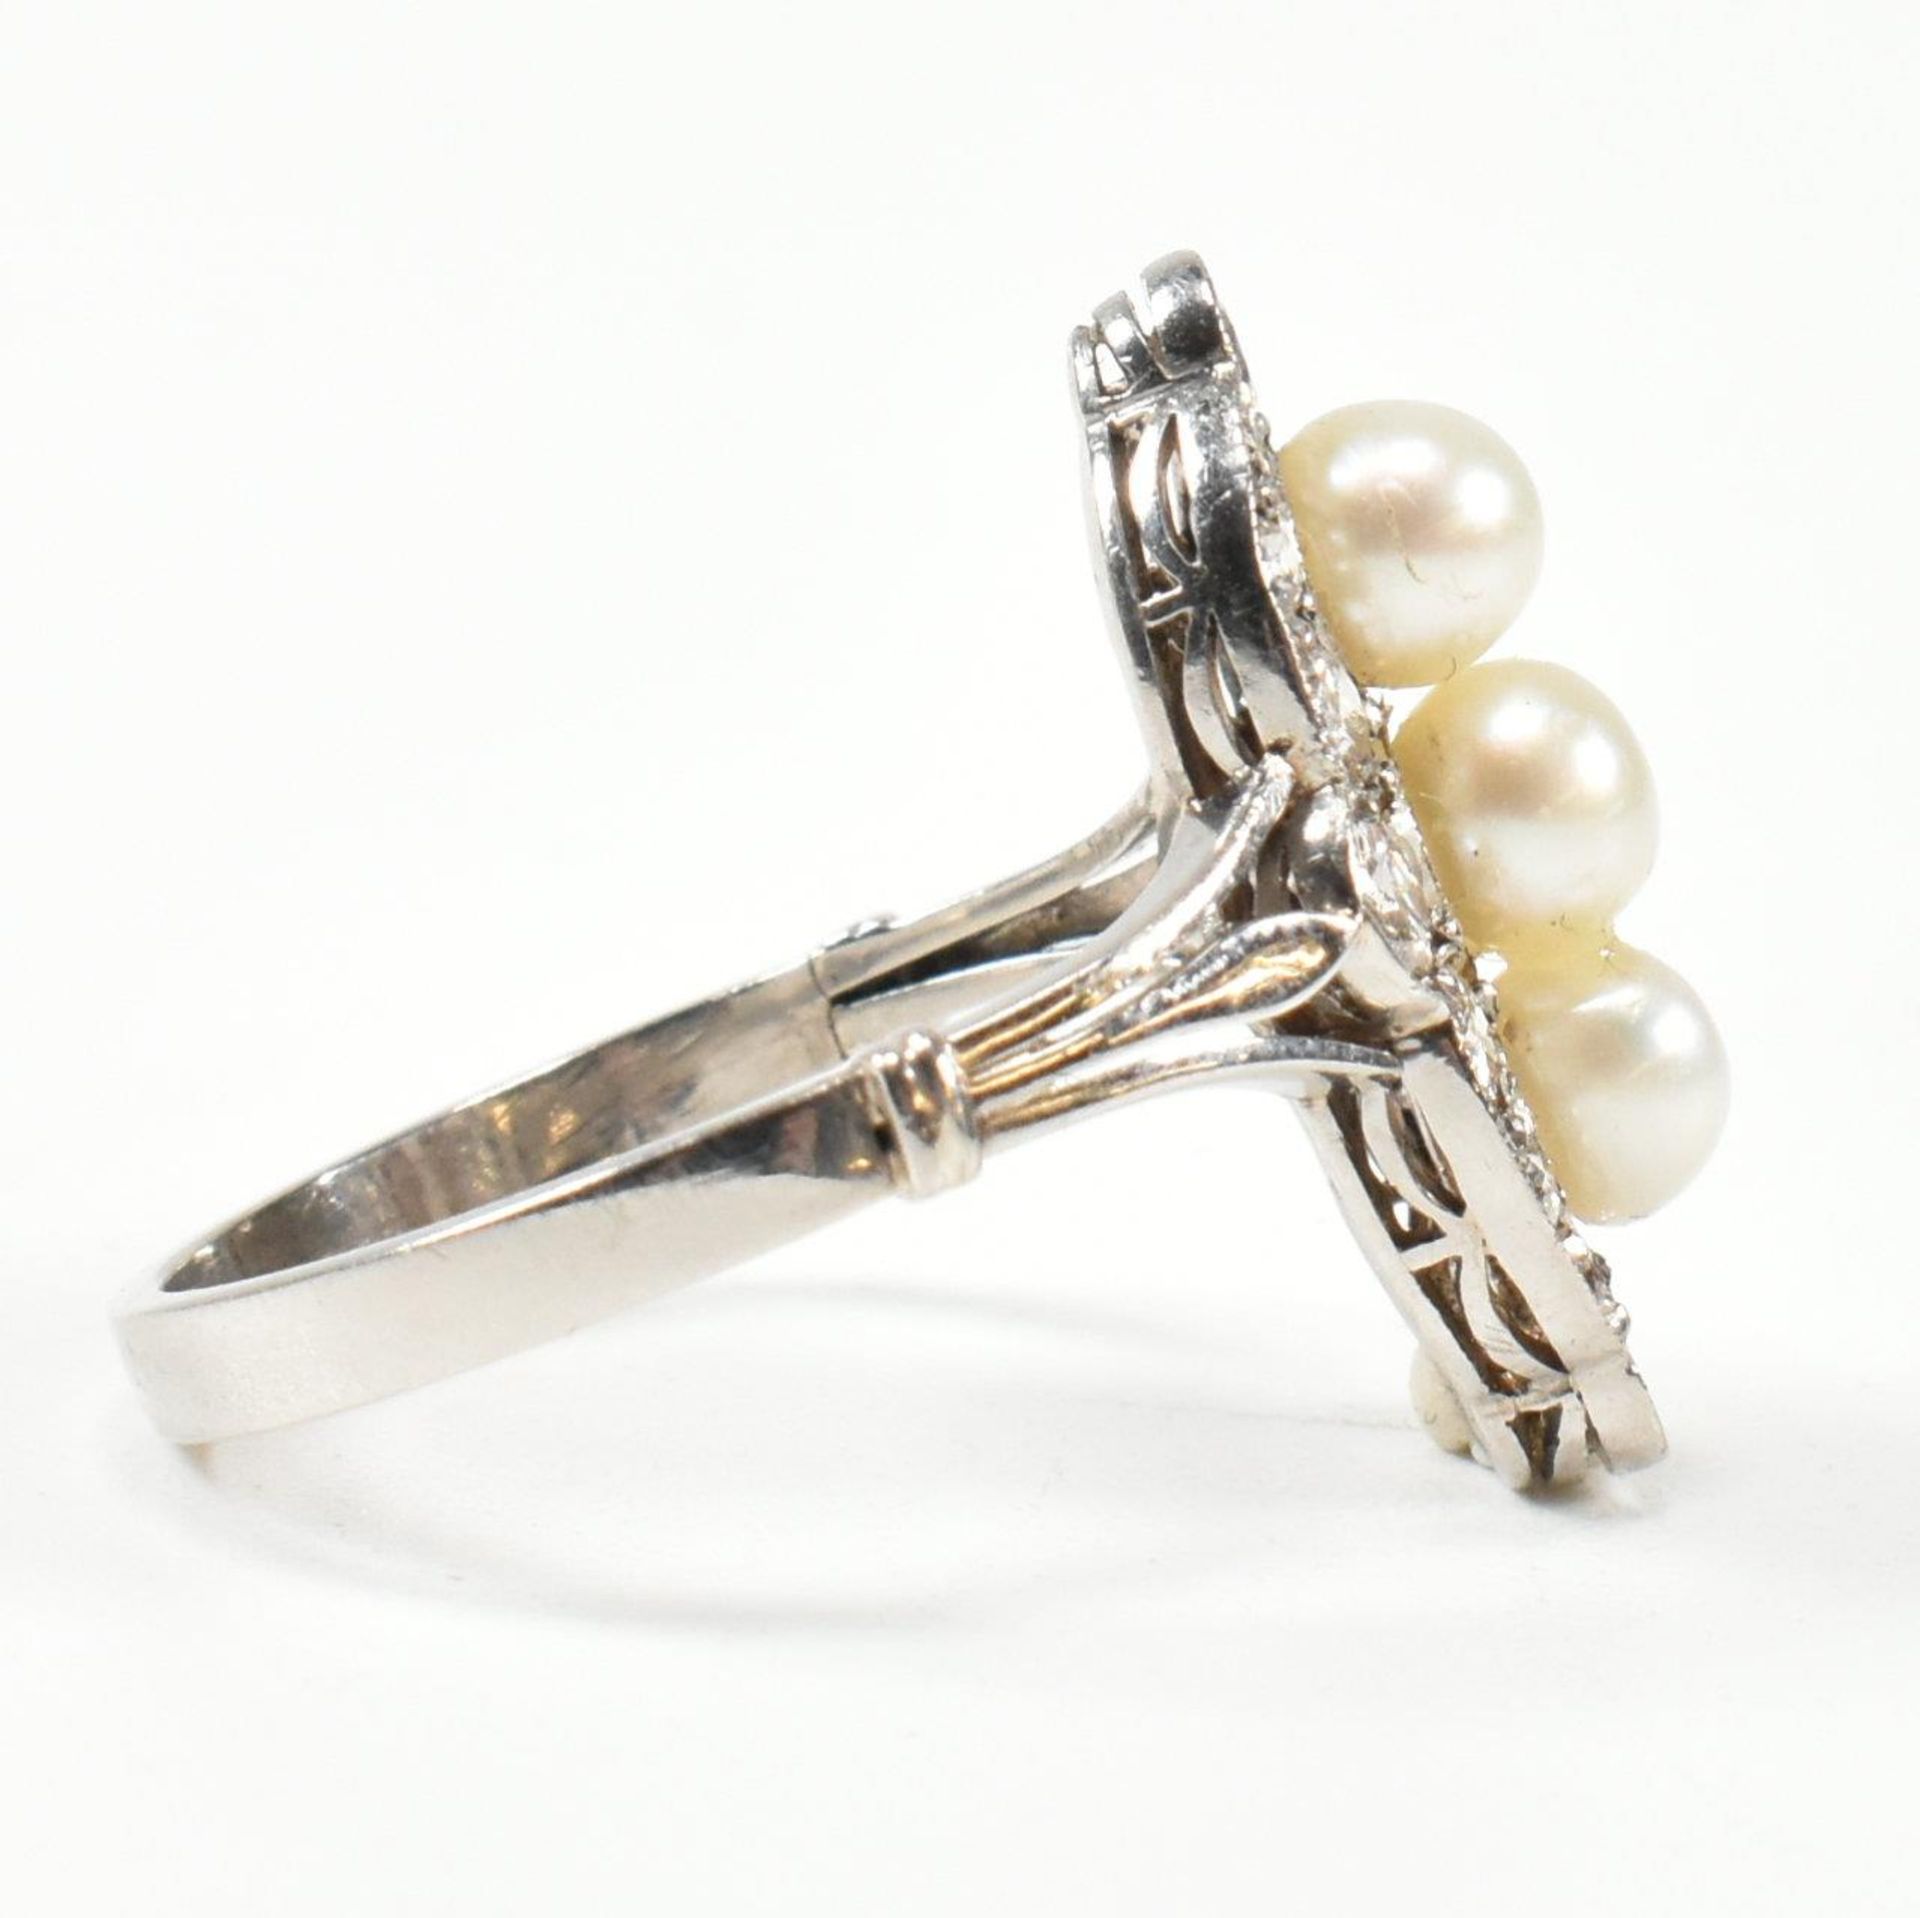 CASED PEARL & DIAMOND MARQUISE RING - Image 4 of 6